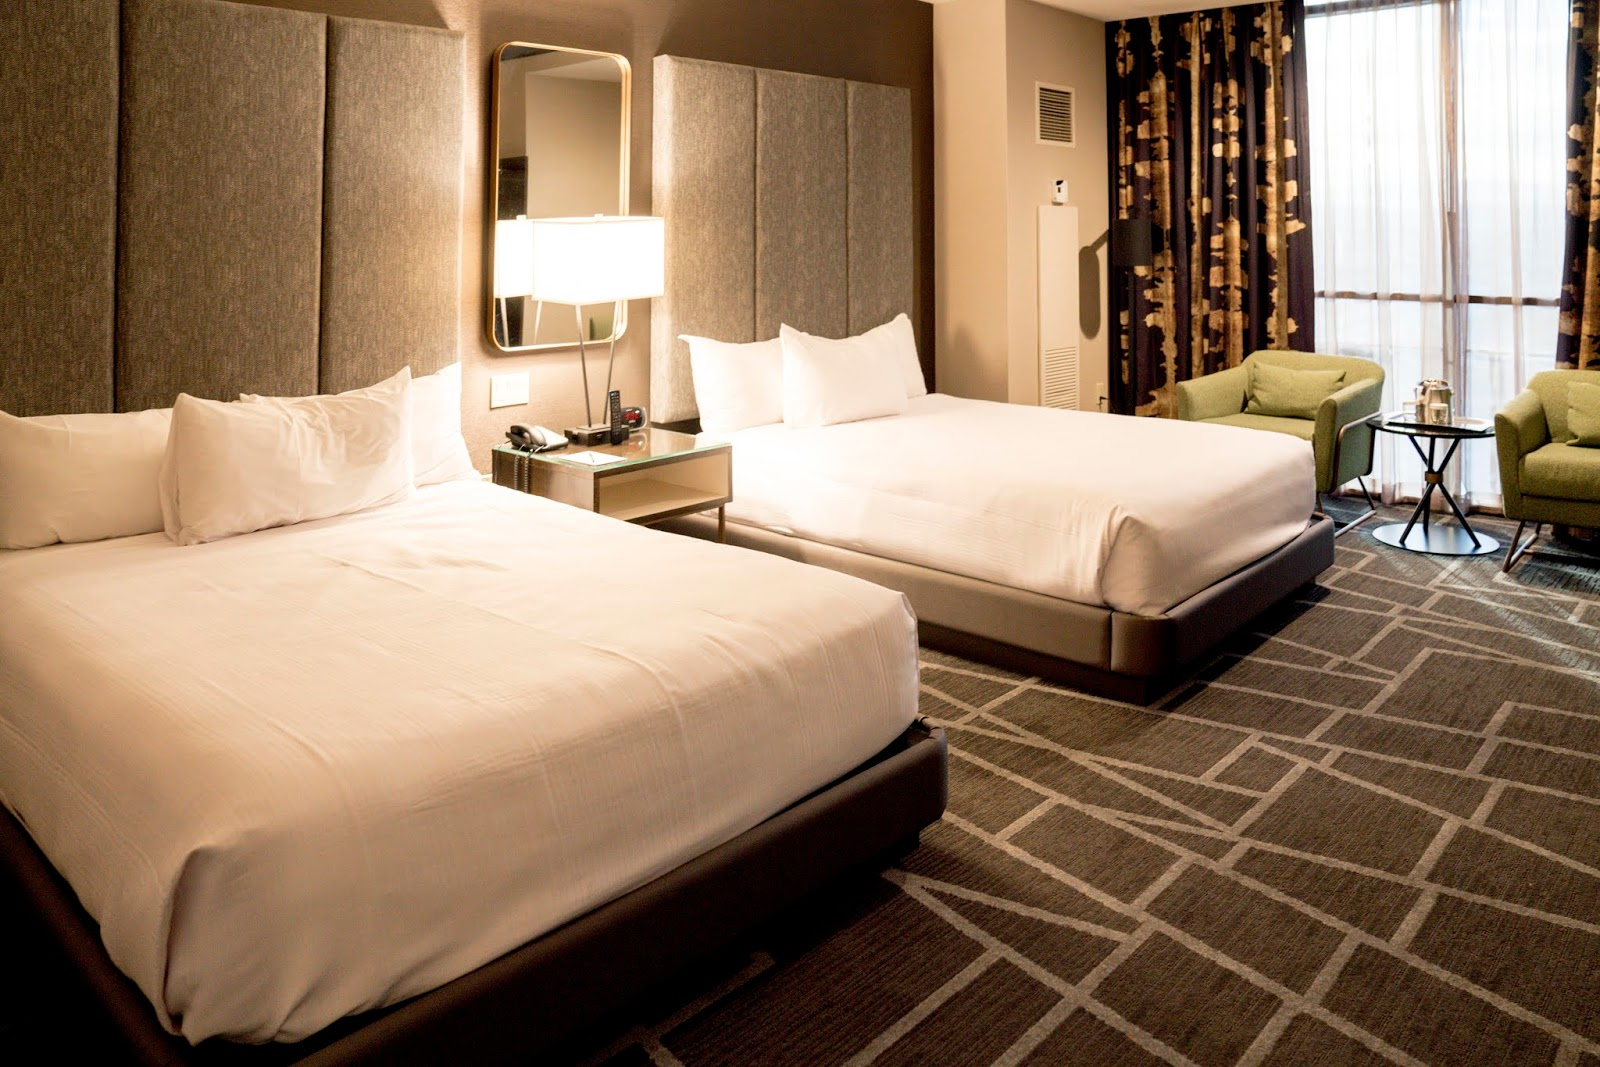 Luxor tower room is shown with two beds having a modern feel